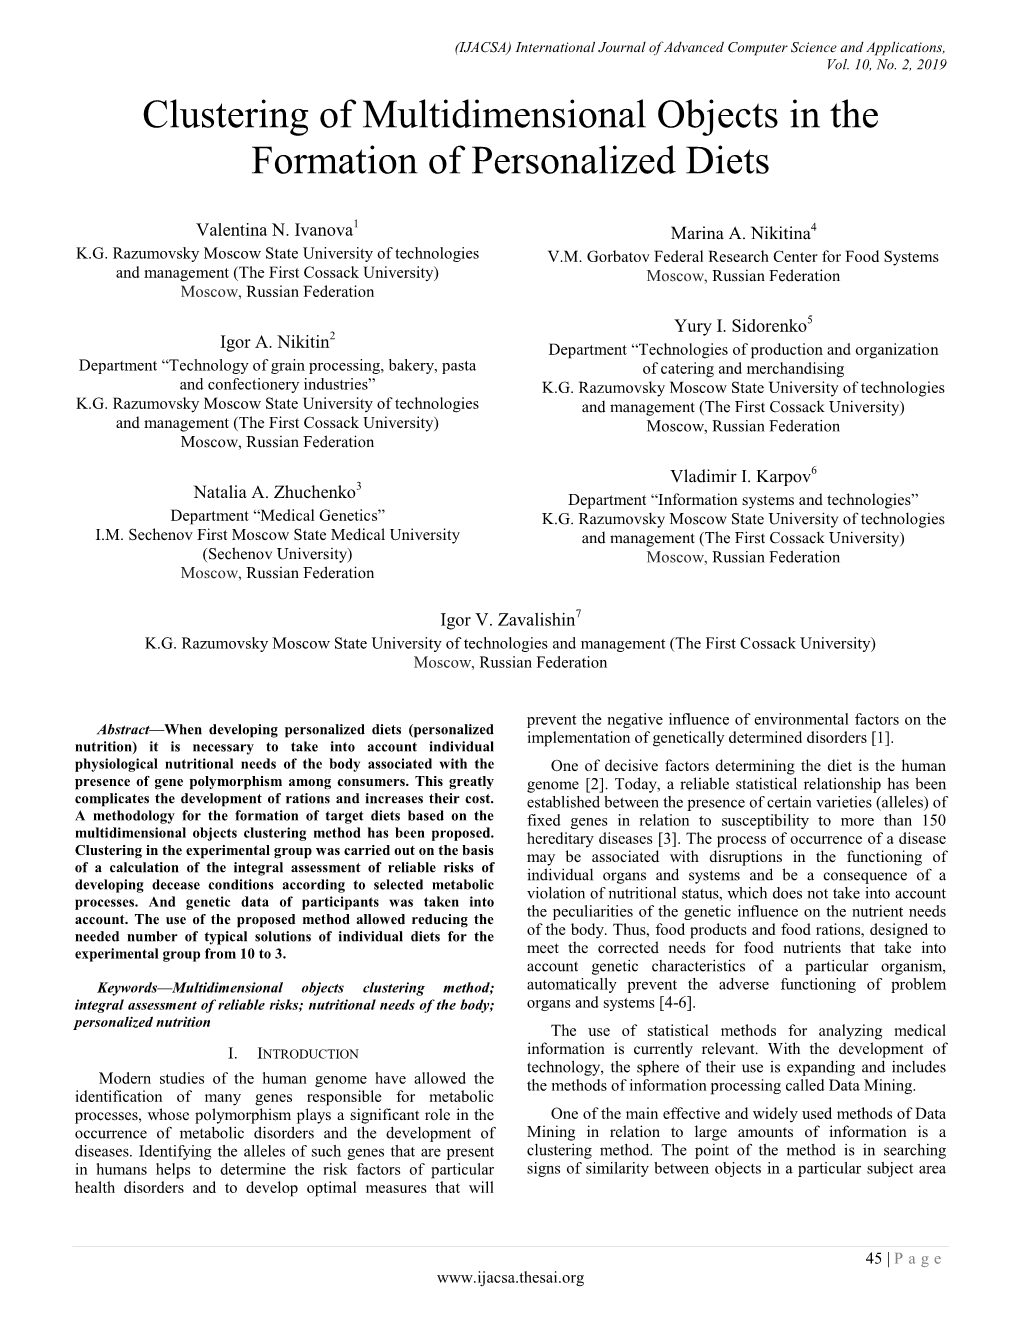 Clustering of Multidimensional Objects in the Formation of Personalized Diets